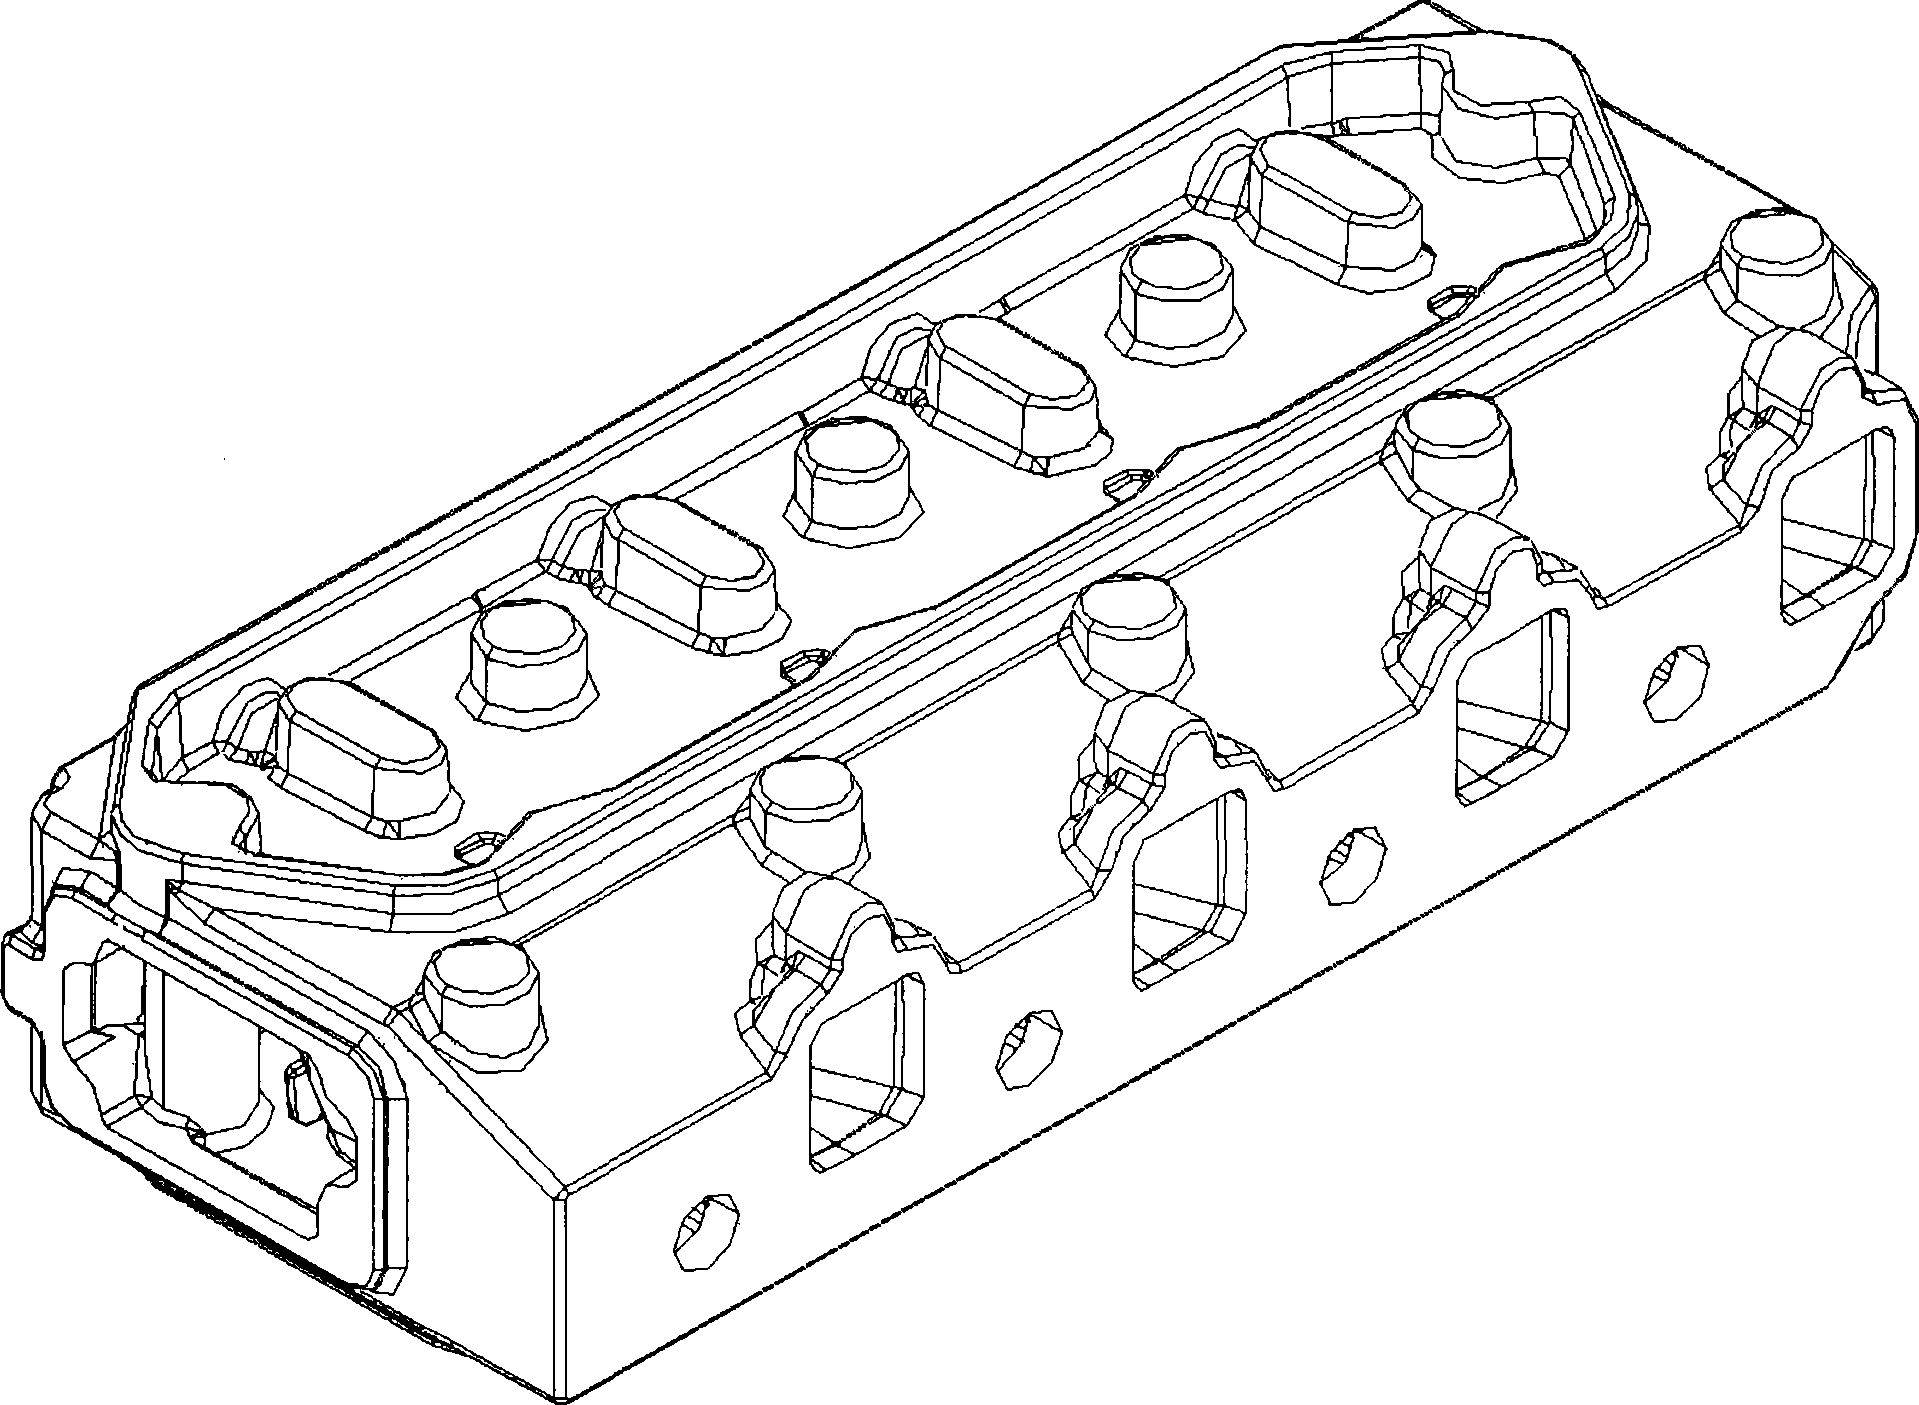 Method of casting engine cylinder head with lost foam